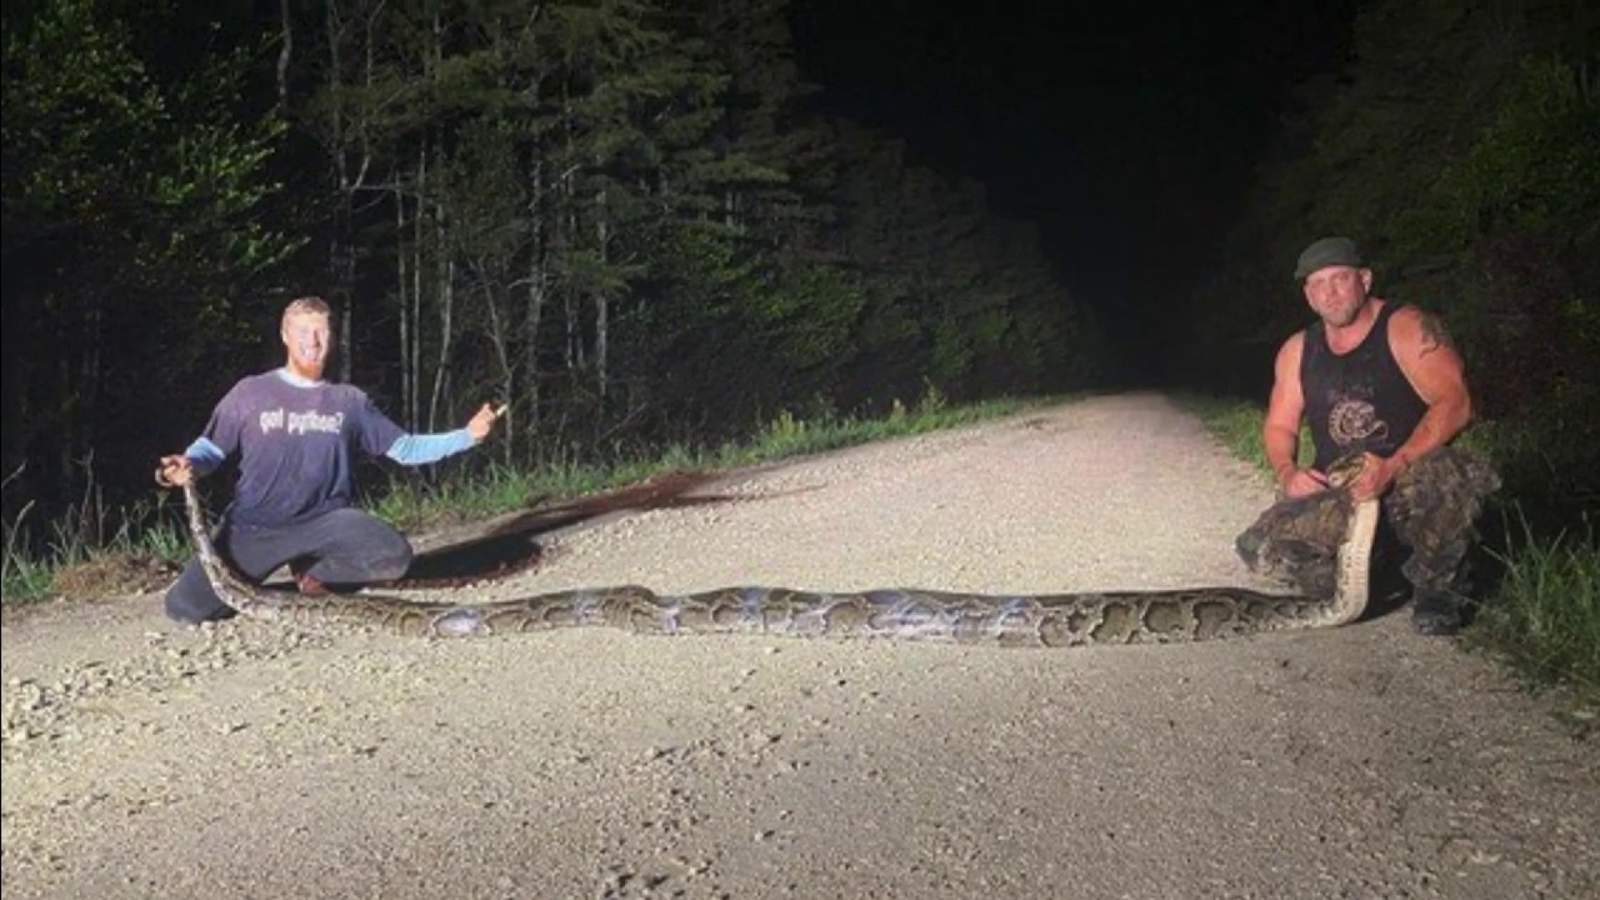 Fort Lauderdale duo breaks record with 18.9-foot python caught in Everglades